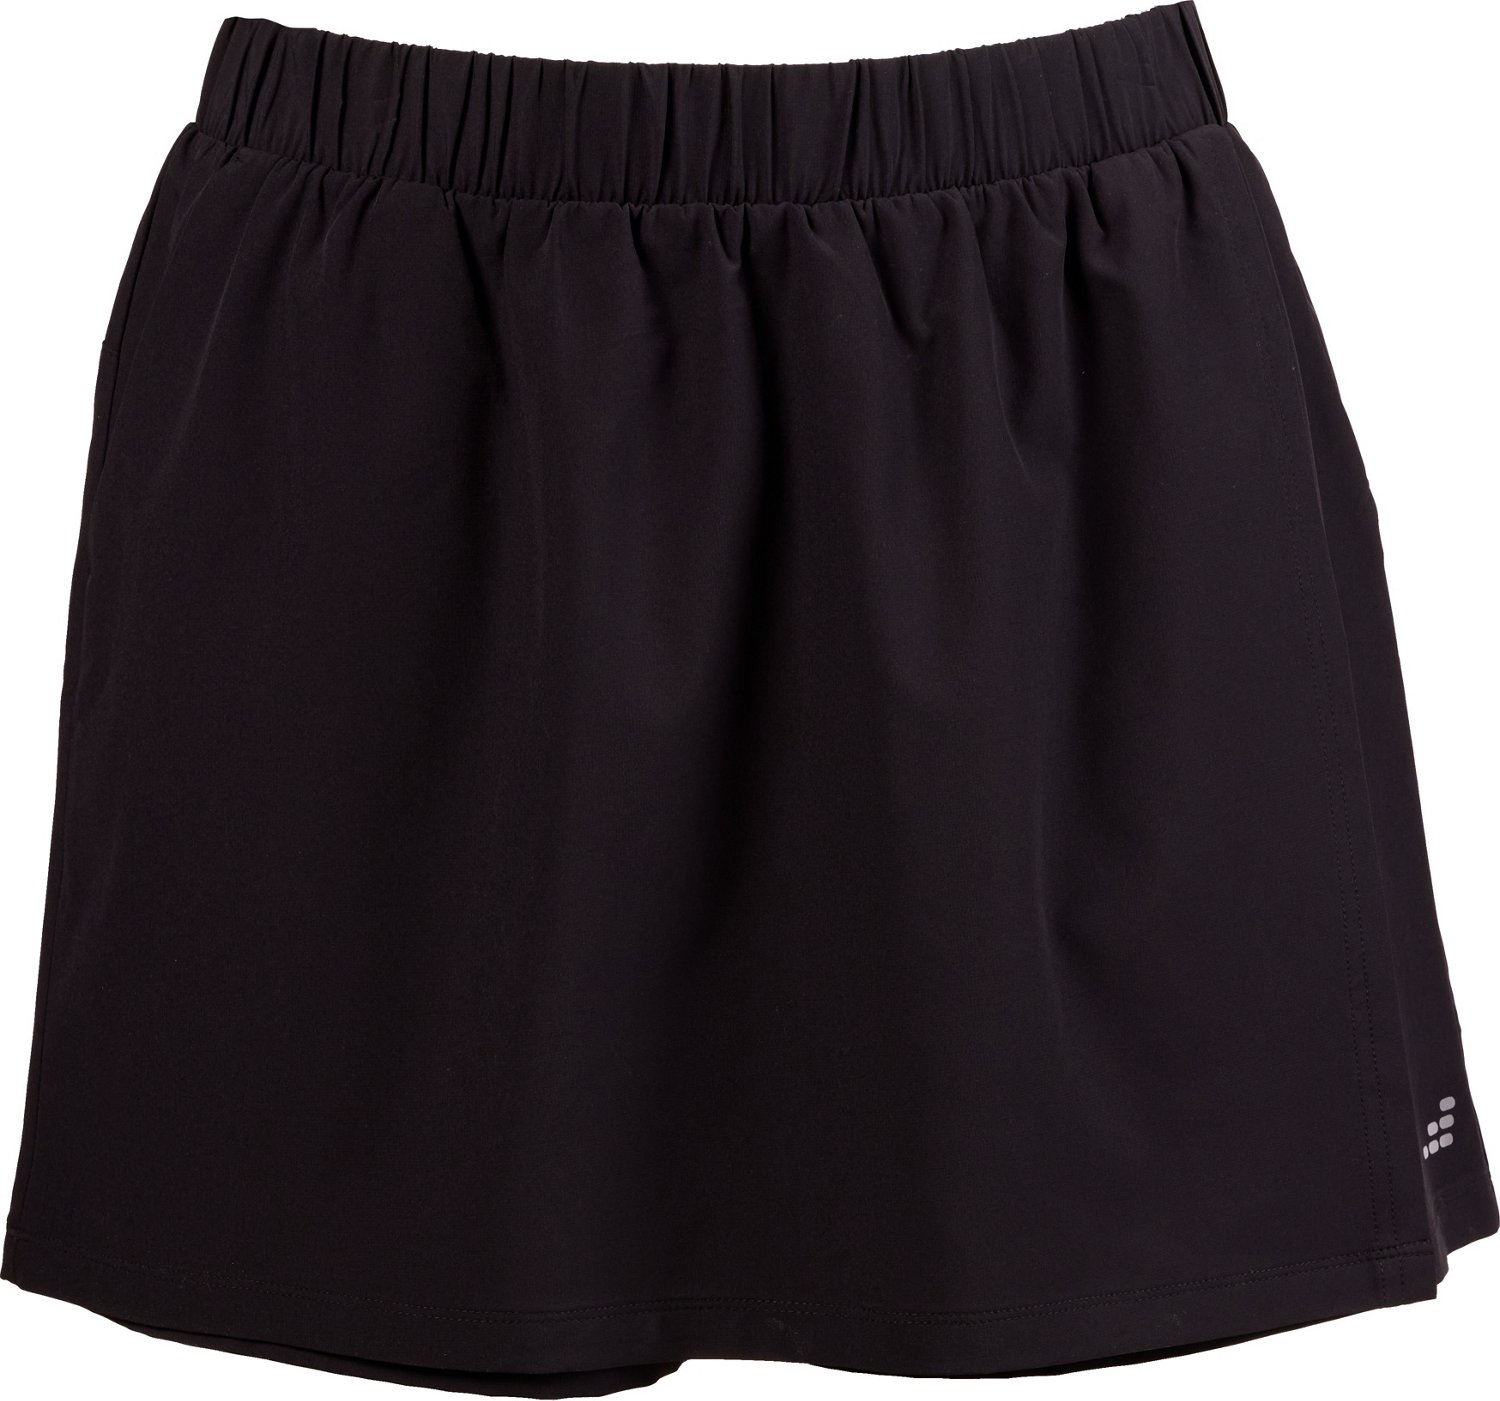 BCG Women's Club Sport Plus Size Skort | Free Shipping at Academy